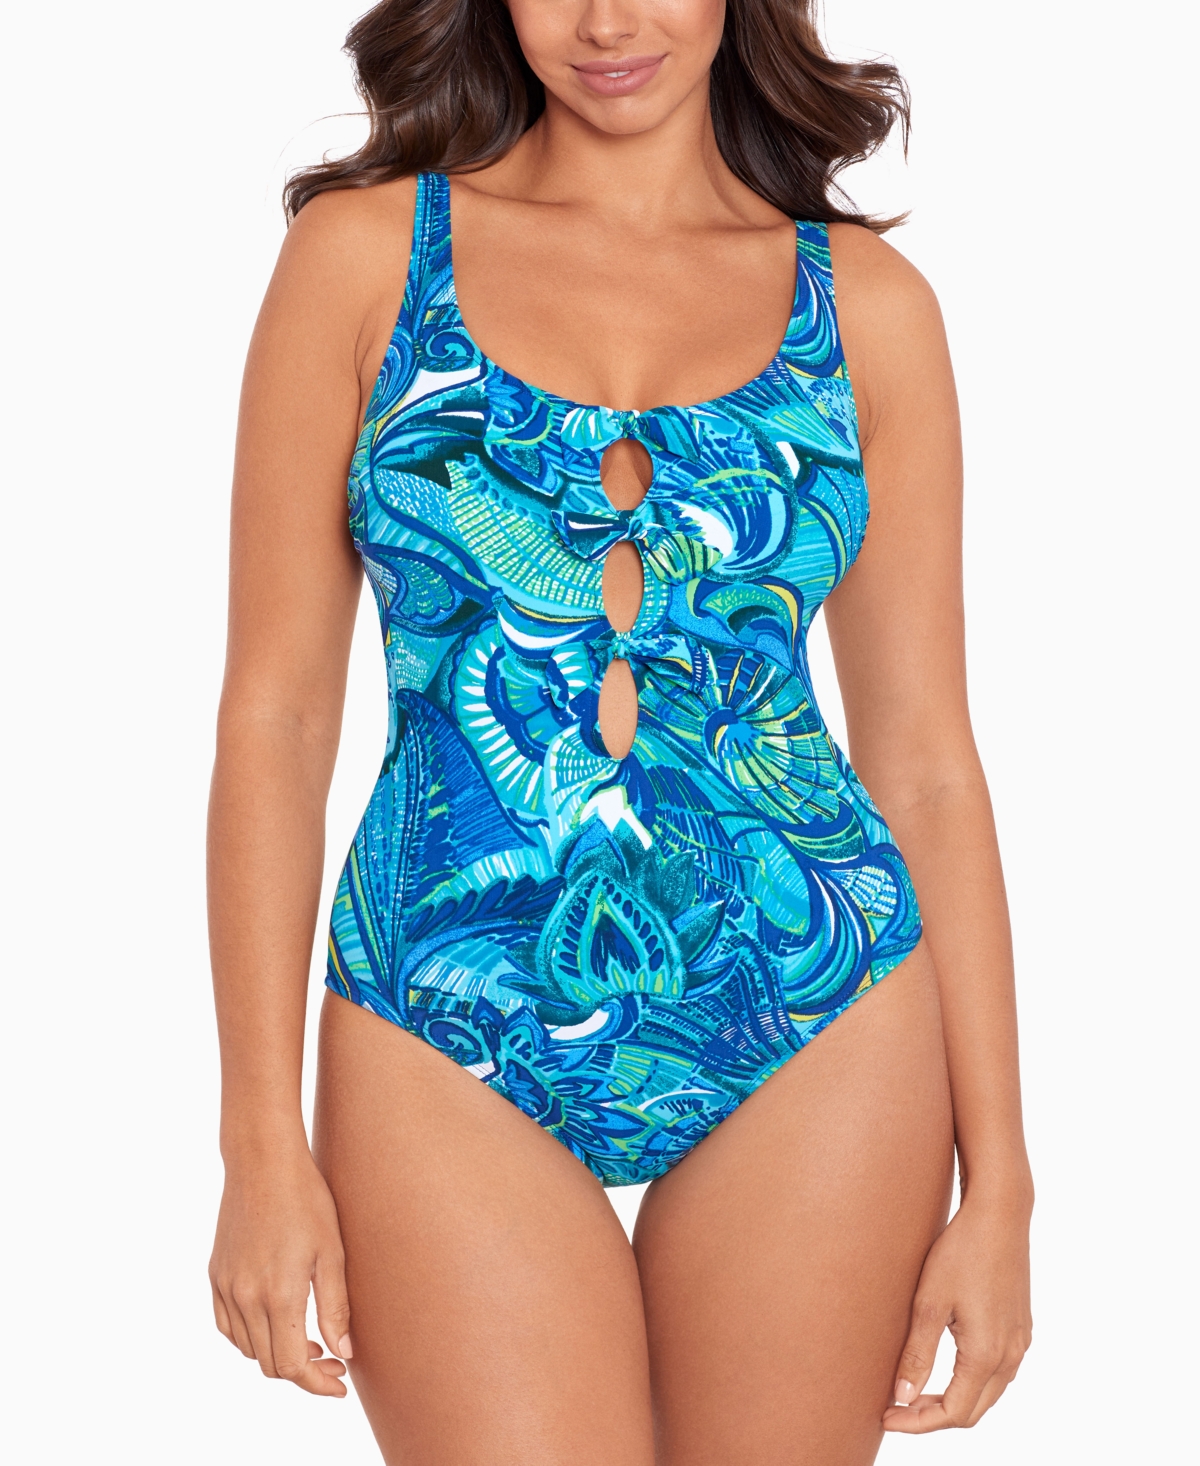 SKINNY DIPPERS WOMEN'S CONCH ALYSA ONE-PIECE SWIMSUIT